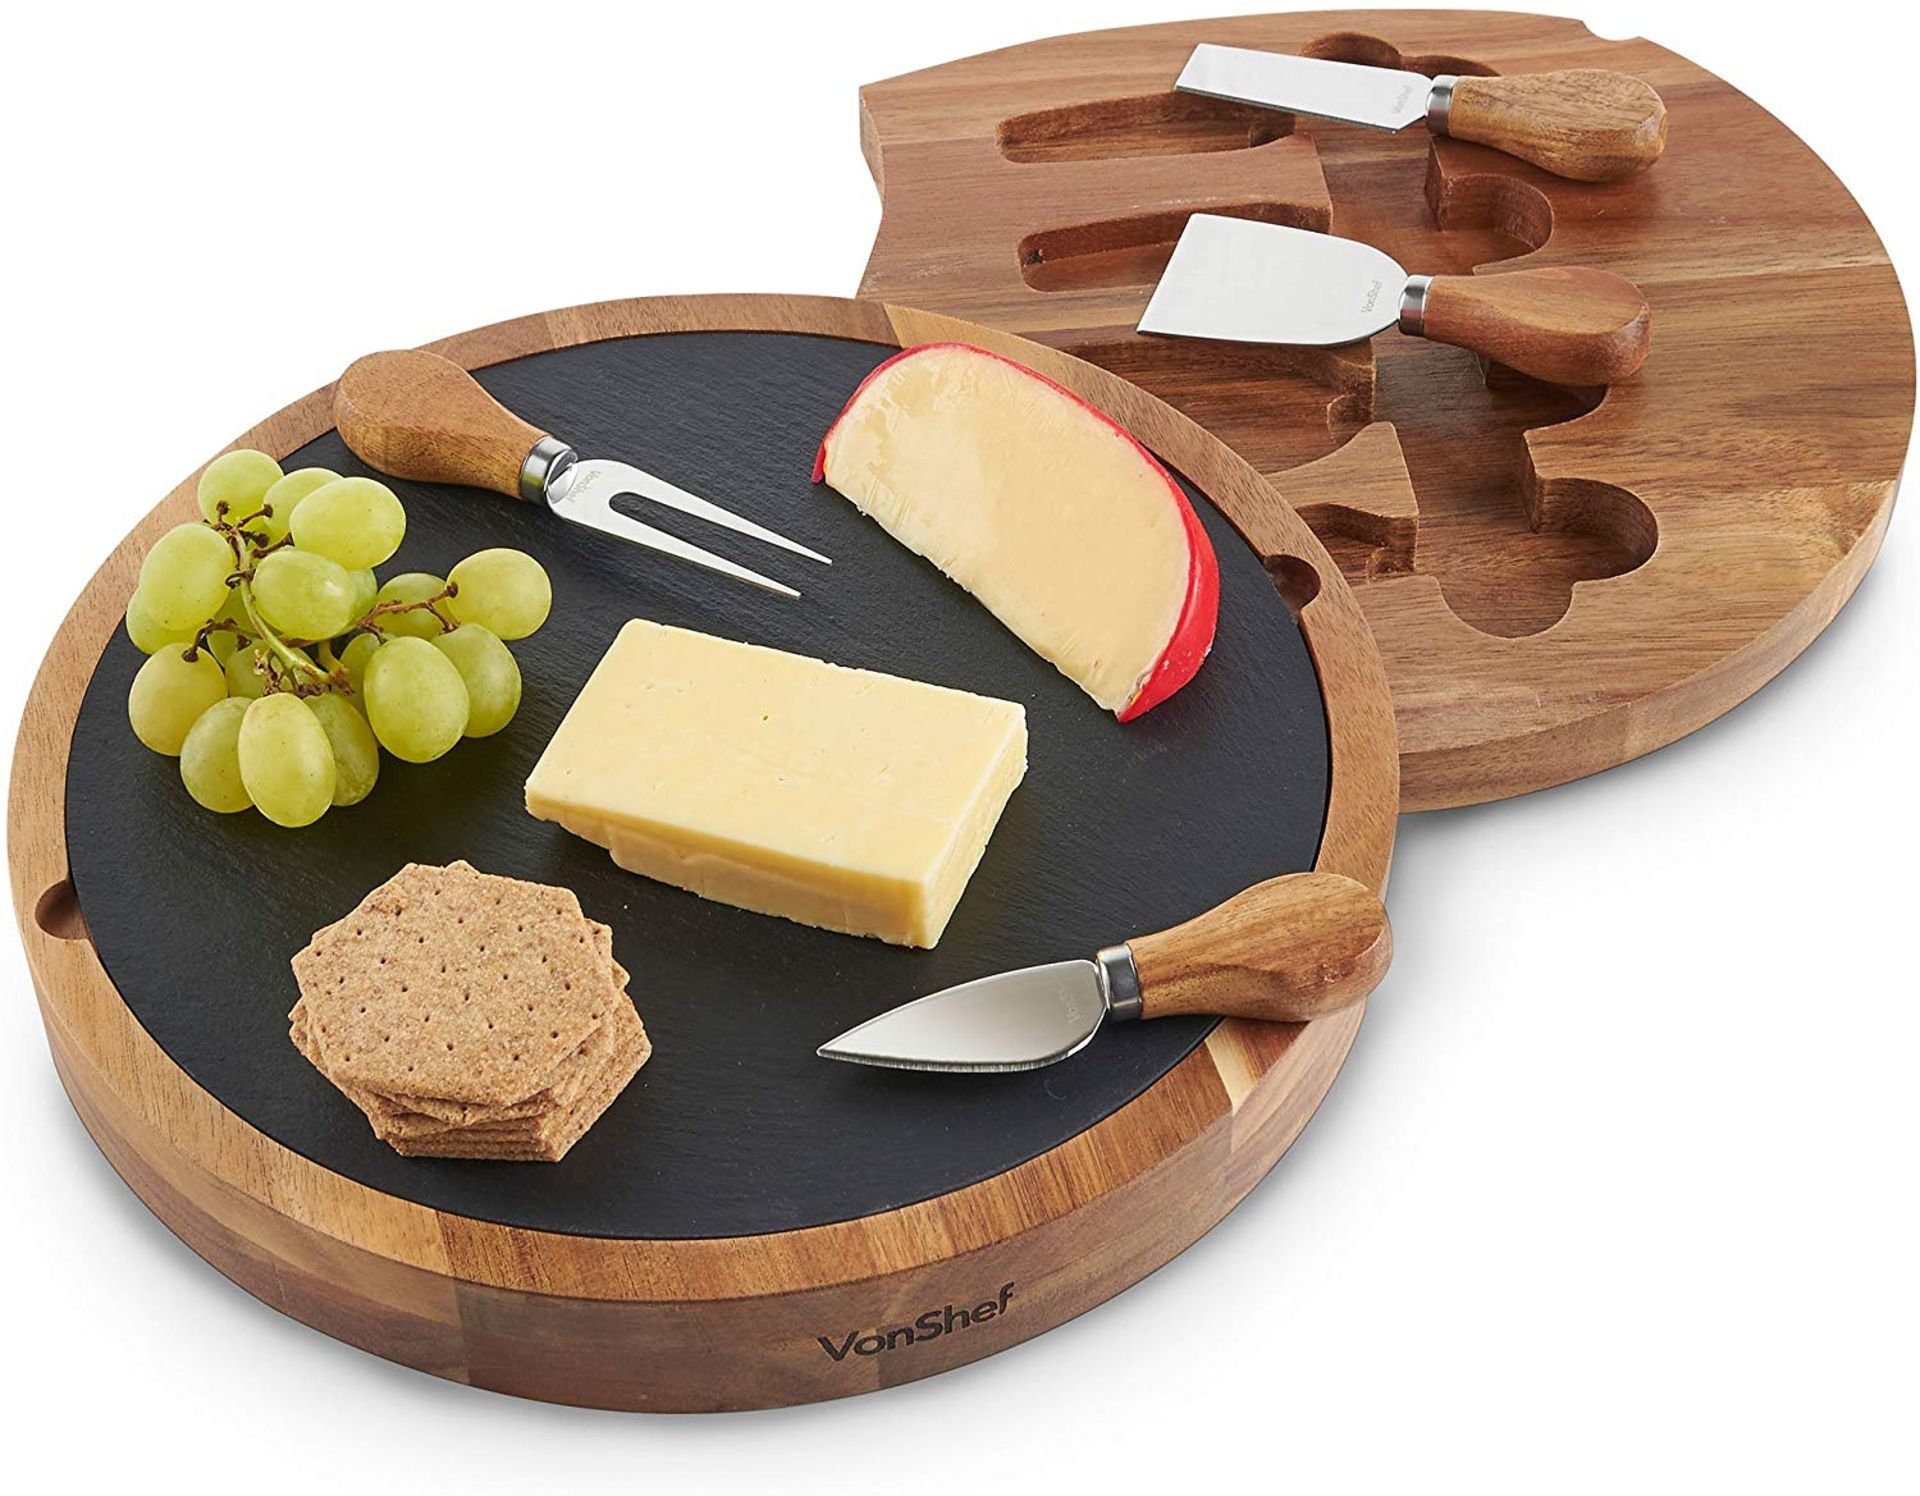 (S370) Cheese Boards with Knives Sets - Bamboo, Slate, Slide-Out Drawers, Specialist Knife Sets...